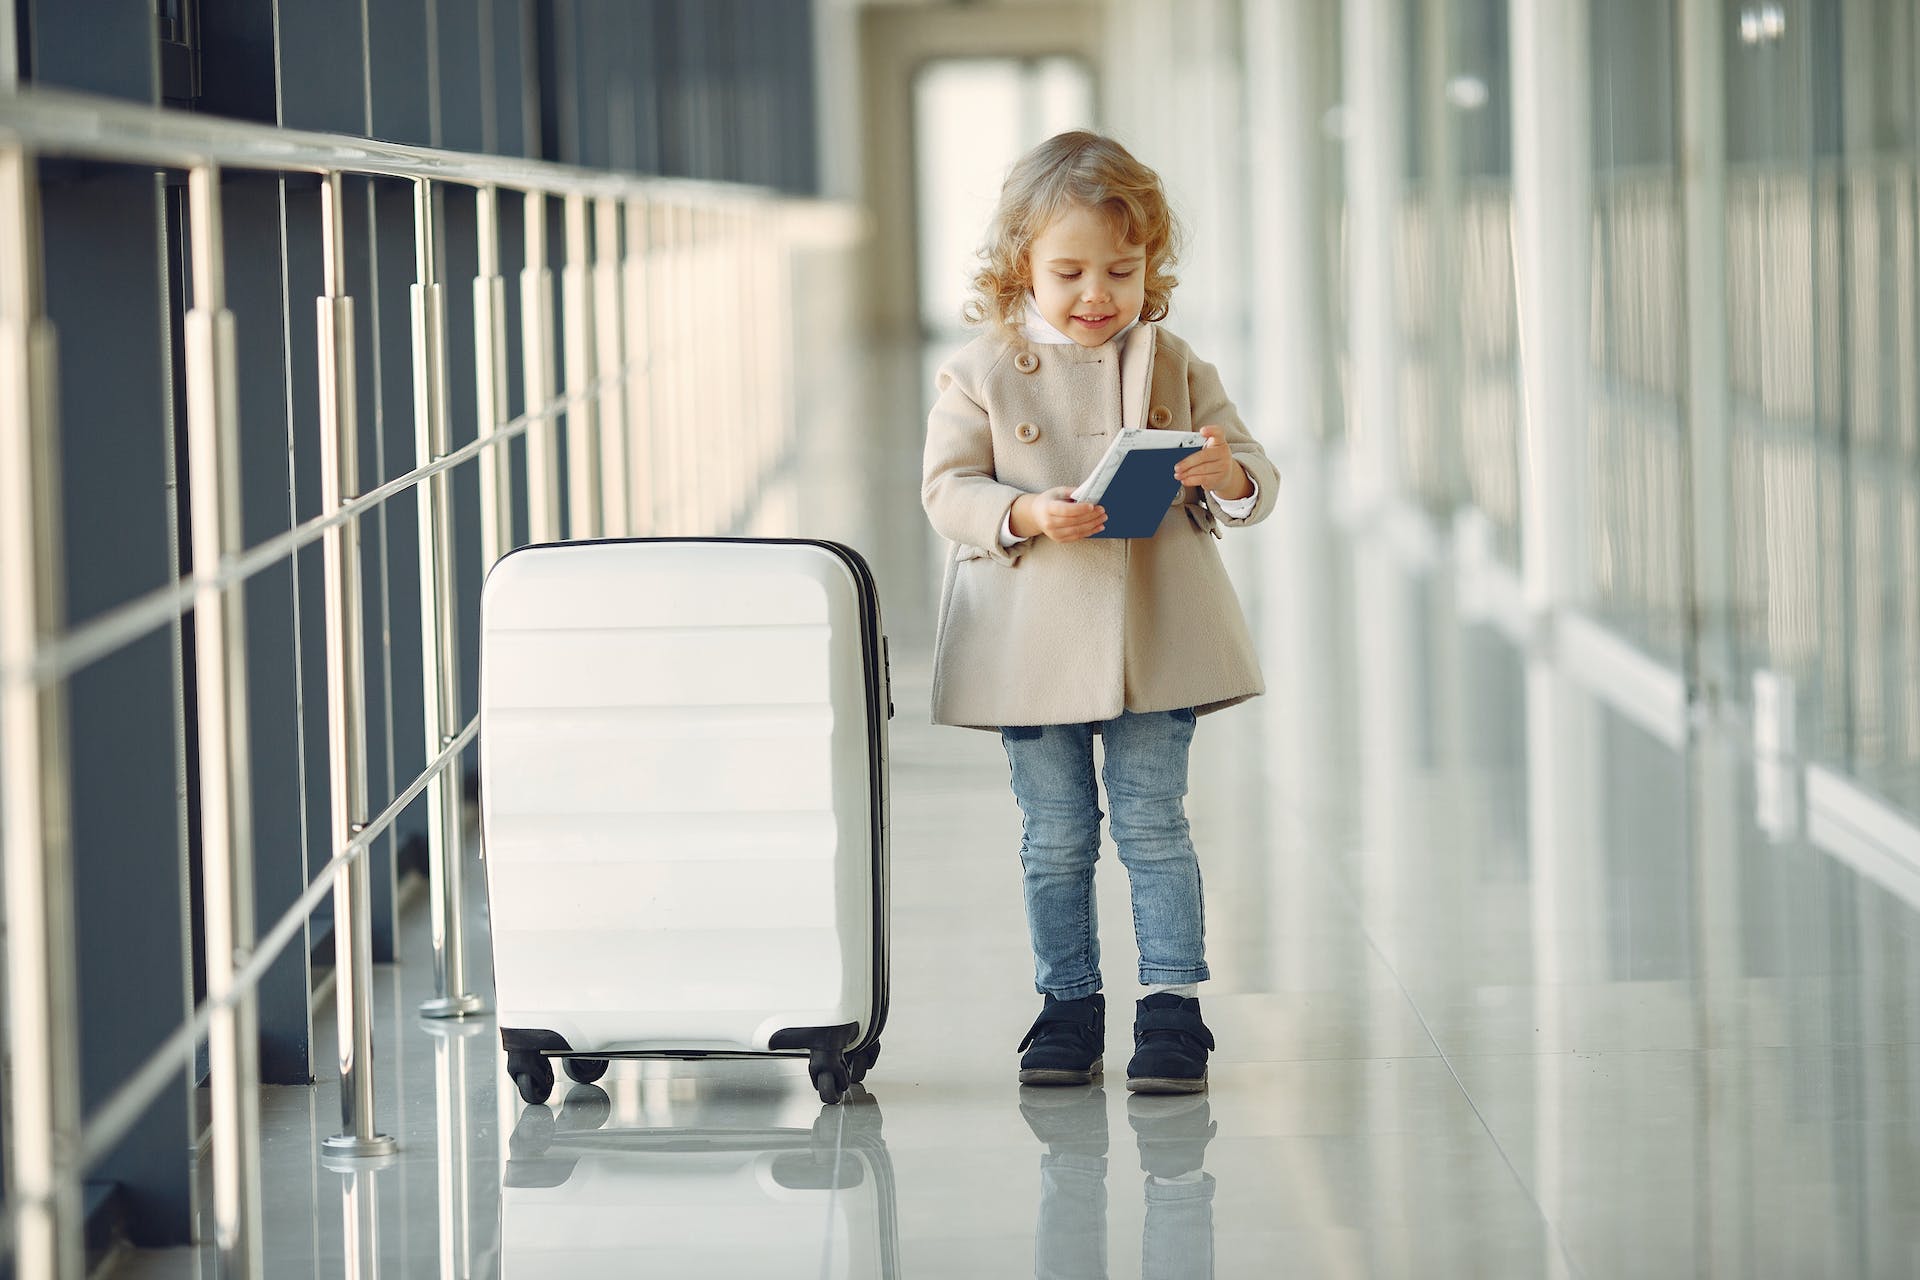 A little girl at an airport | Source: Pexels